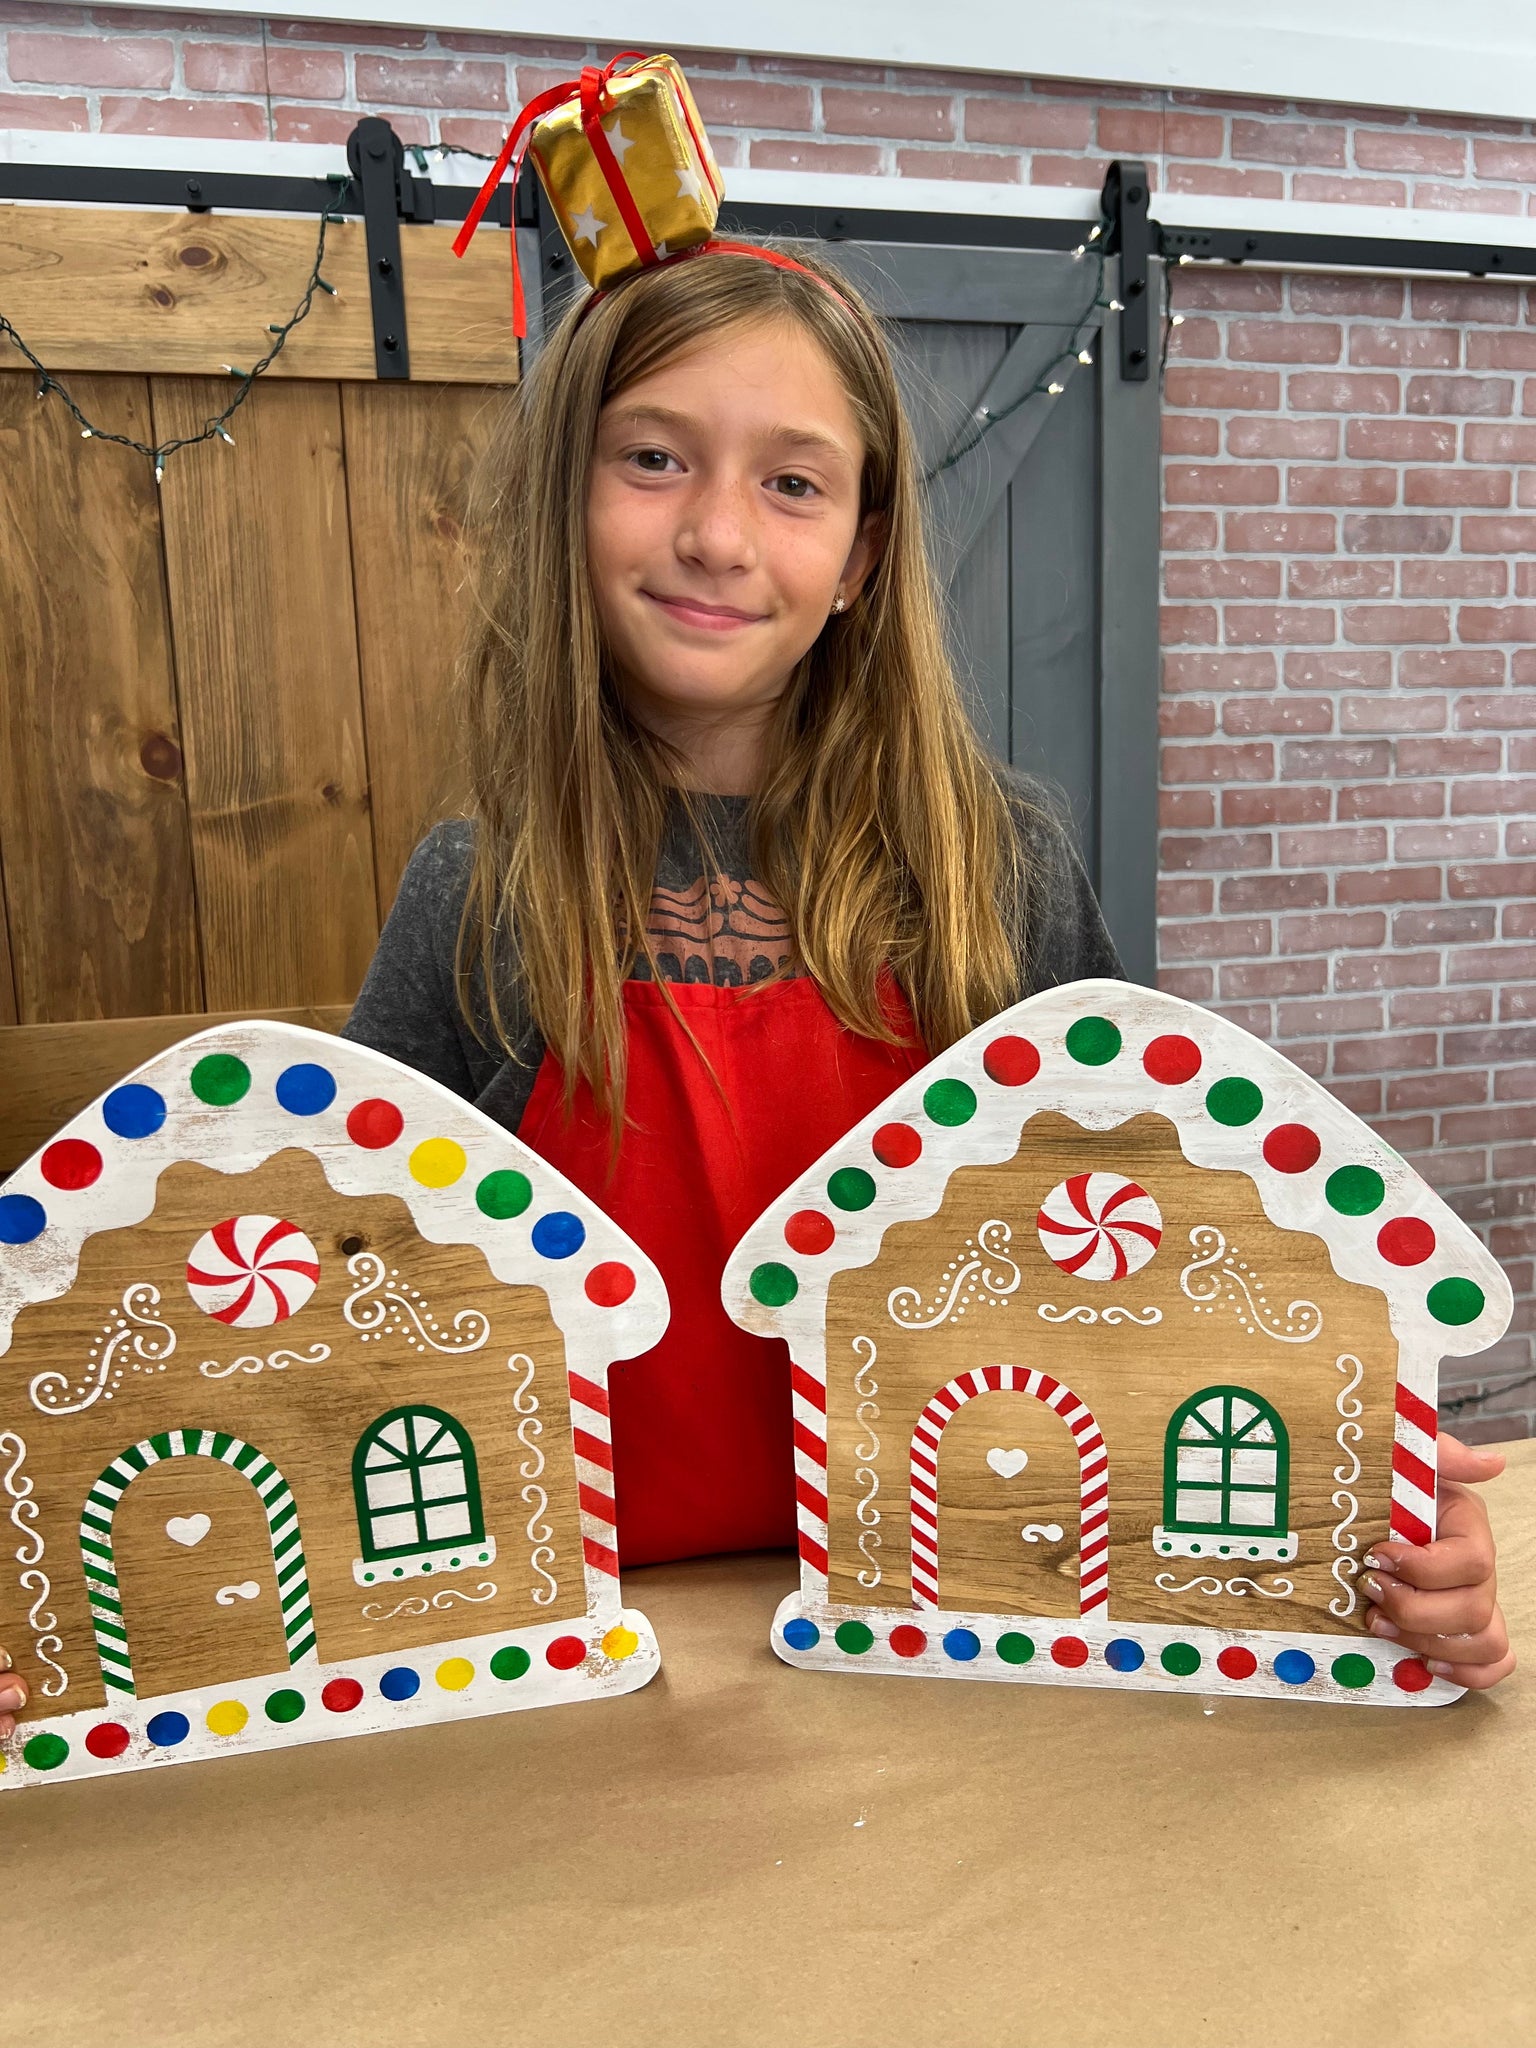 12/3/23 12pm GINGERBREAD HOUSE DIY CLASS – Words on Wood